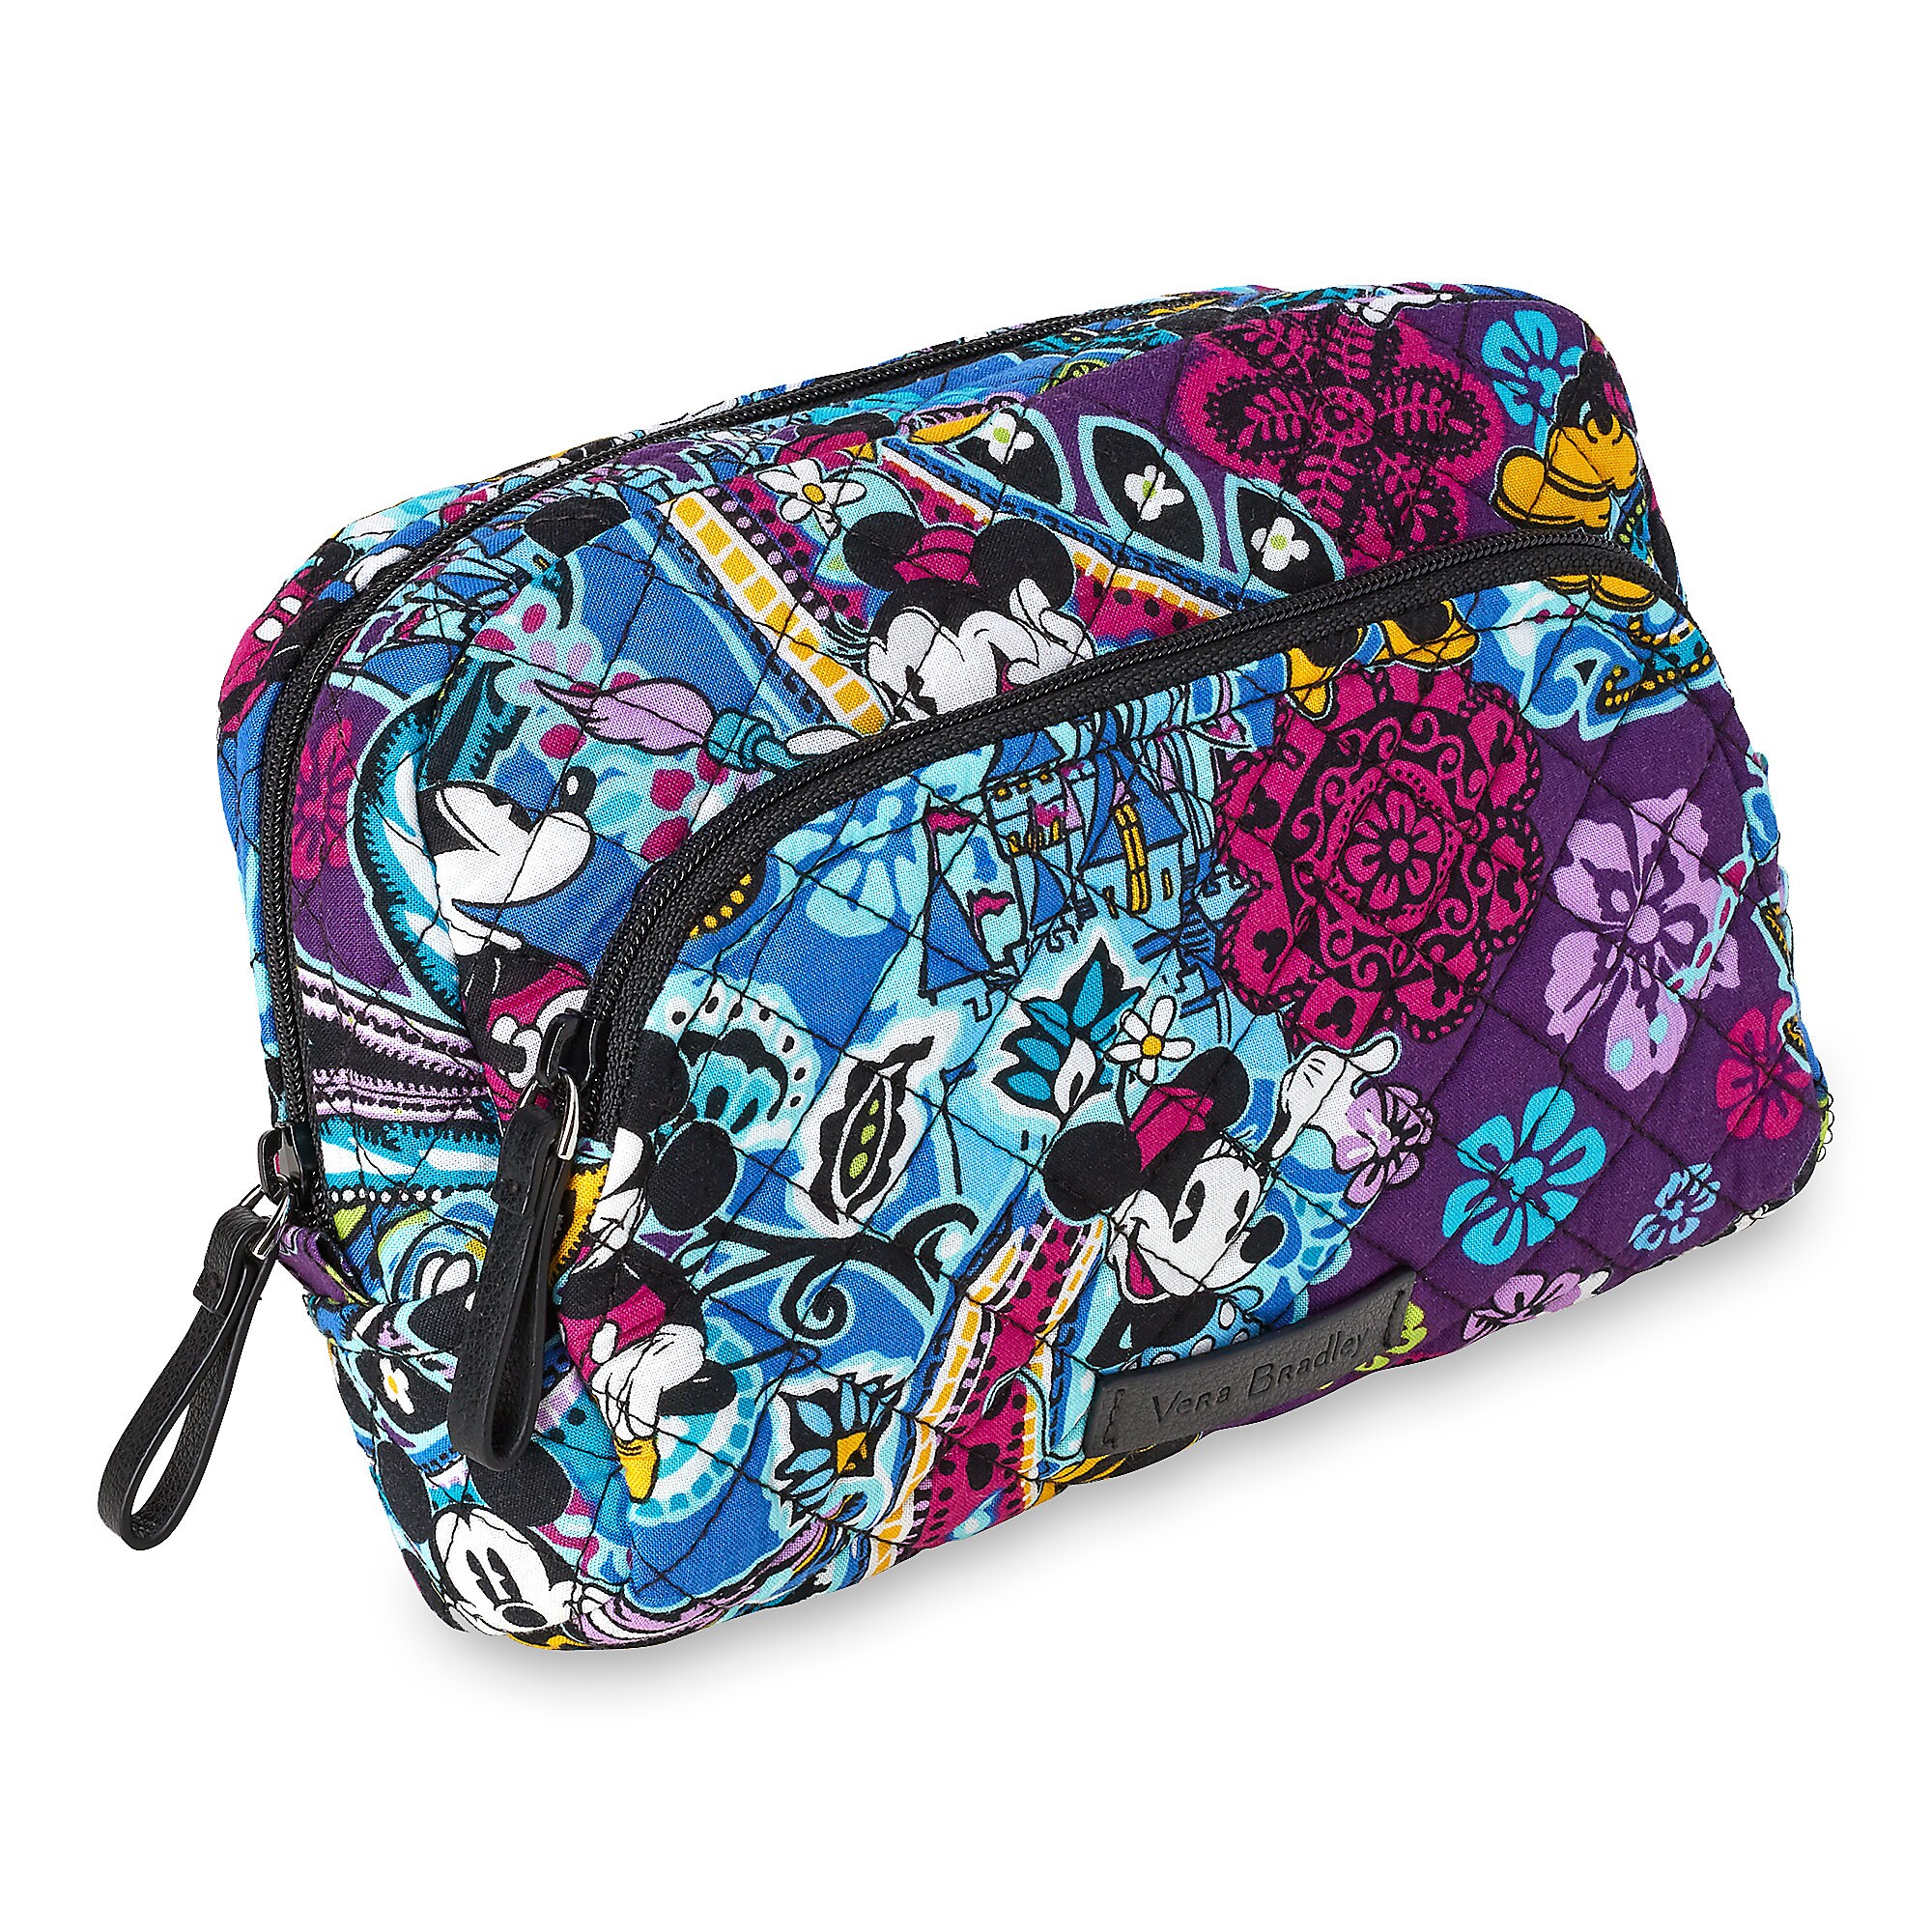 Mickey and Minnie Mouse Paisley Medium Cosmetic Bag by Vera Bradley